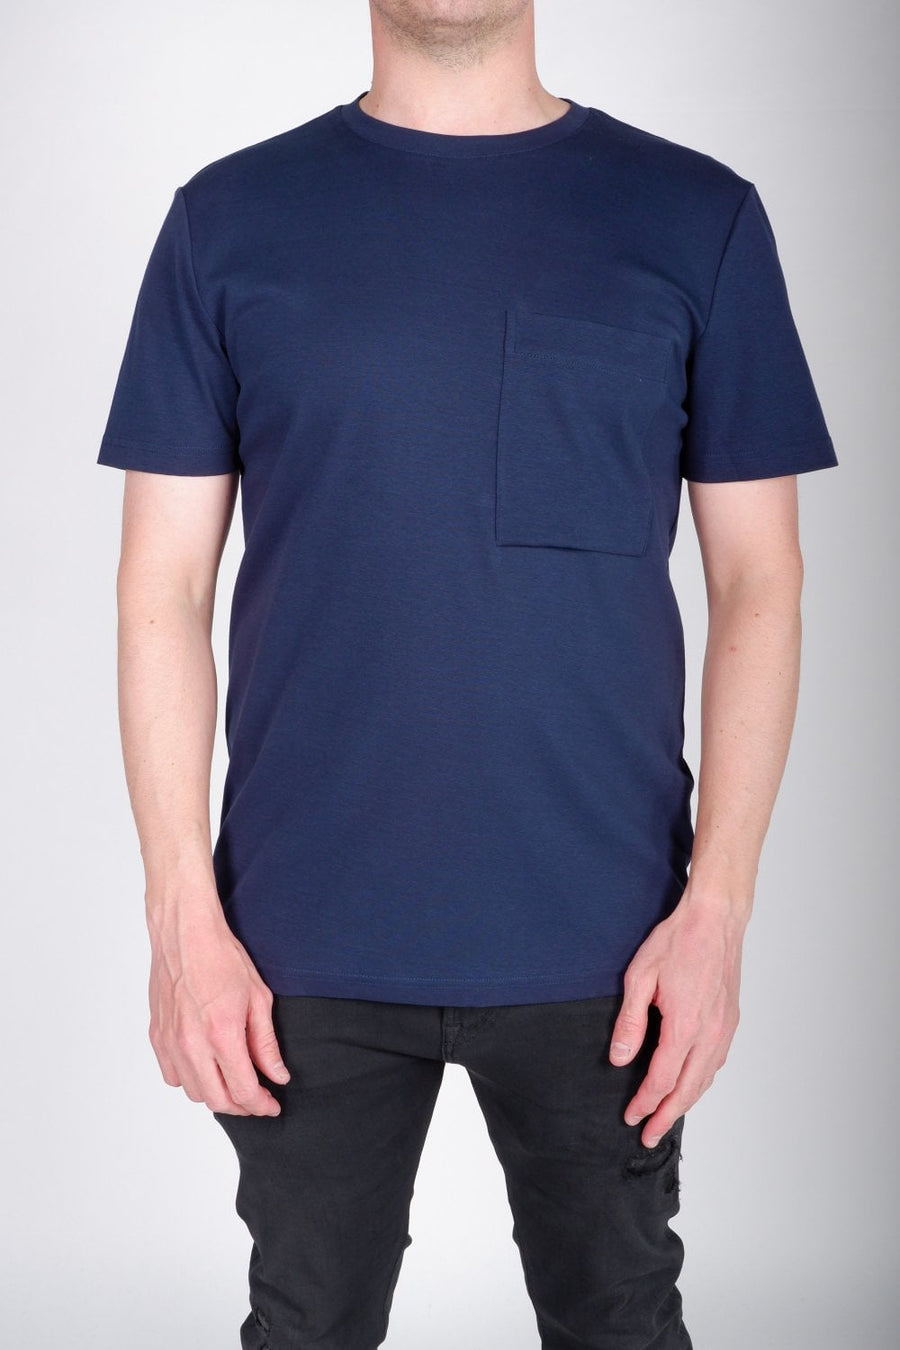 Buy the Antony Morato Front Pocket T-Shirt Navy at Intro. Spend £50 for free UK delivery. Official stockists. We ship worldwide.